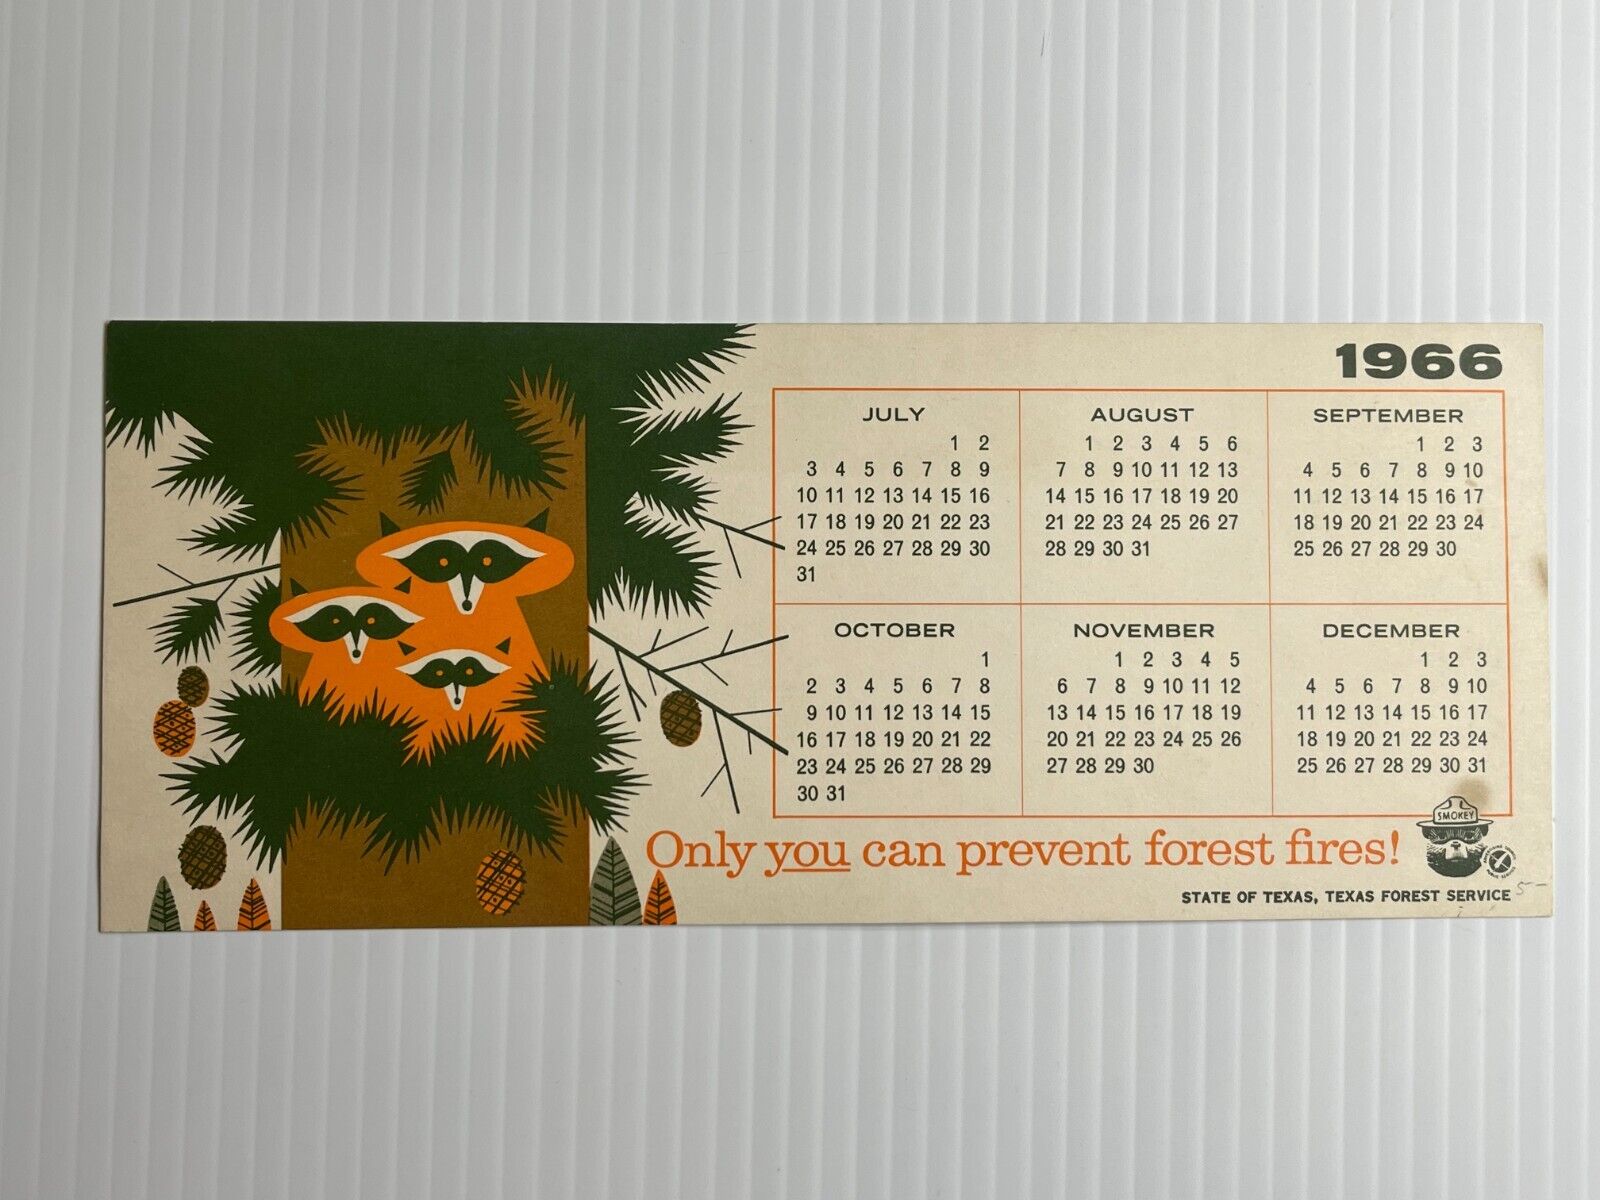 Vintage - Smokey The Bear - State of Texas Forest Service 1966 Calendar